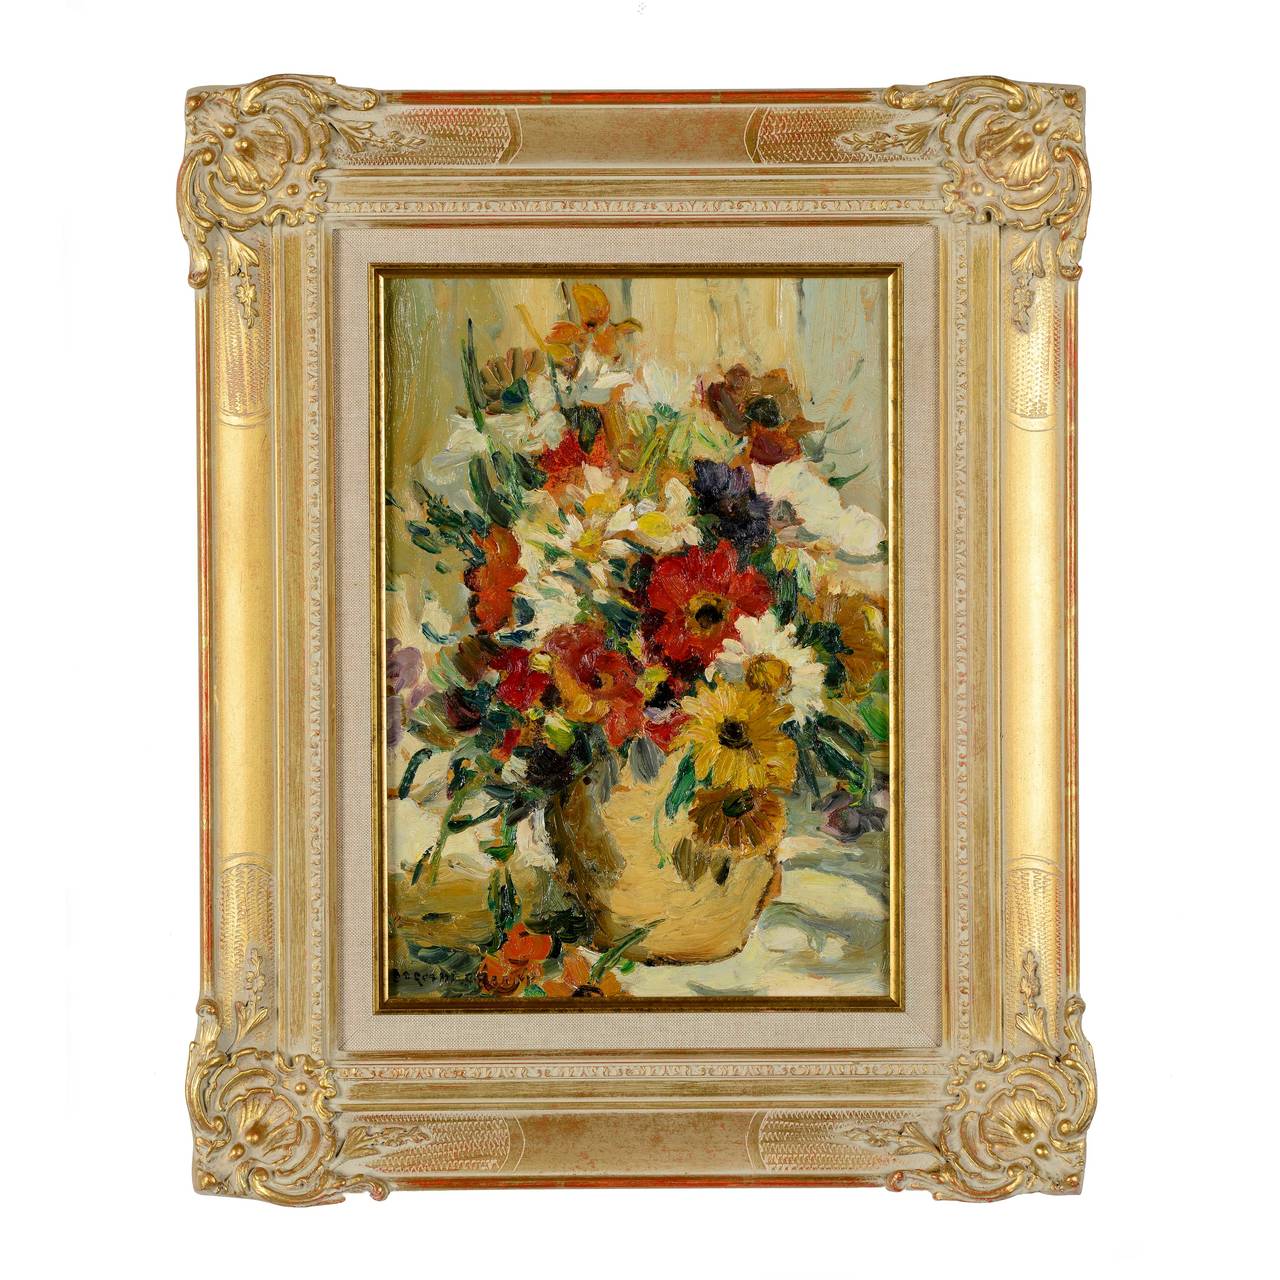 “Flowers” - Painting by Dorothea Sharp